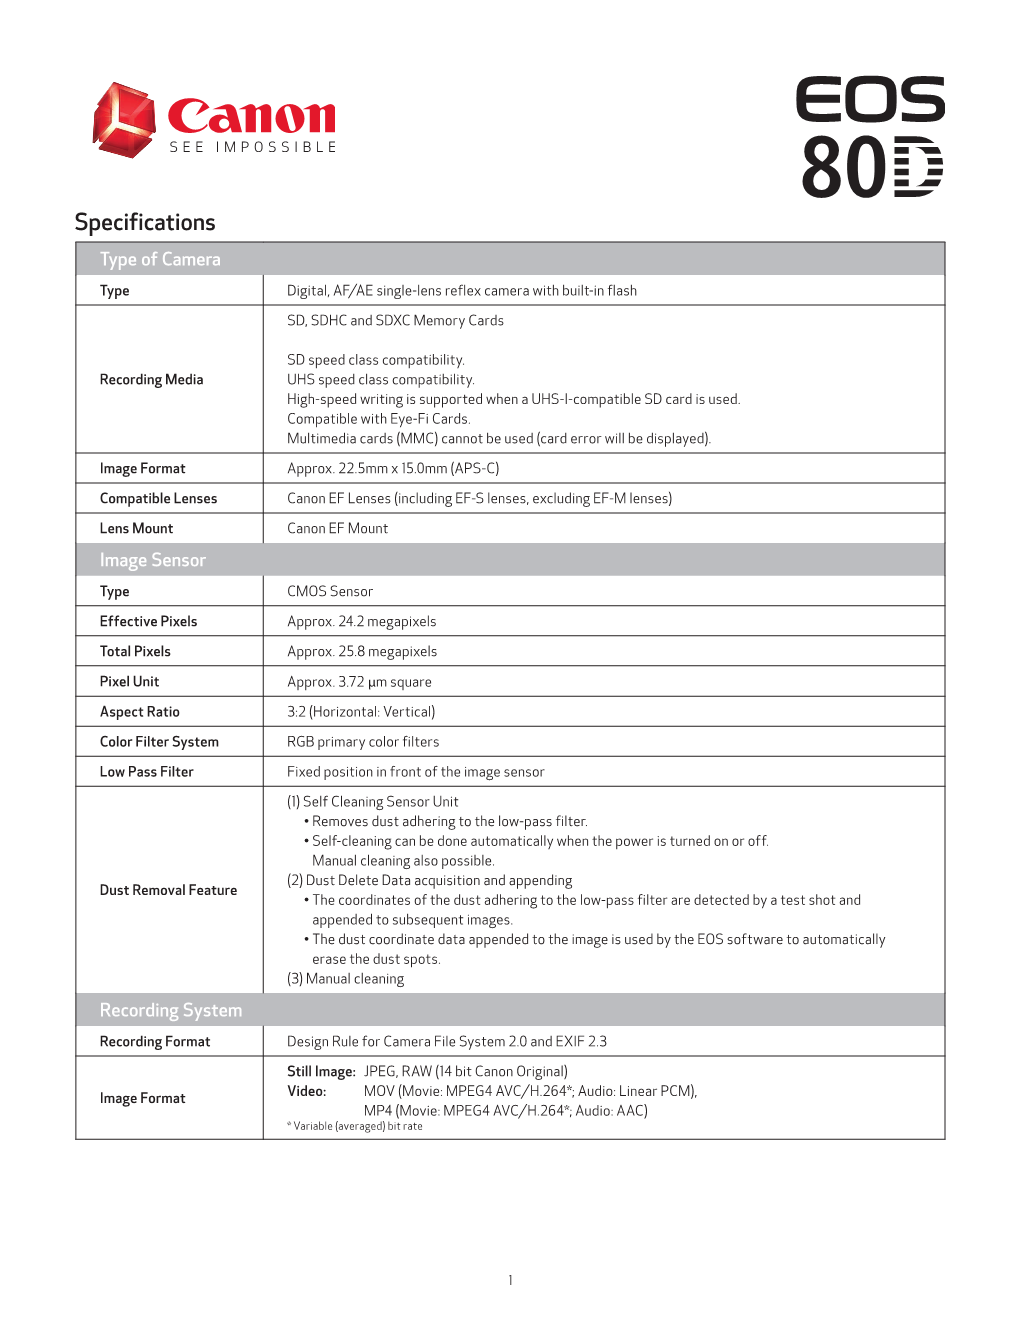 Canon EOS-80D Specifications